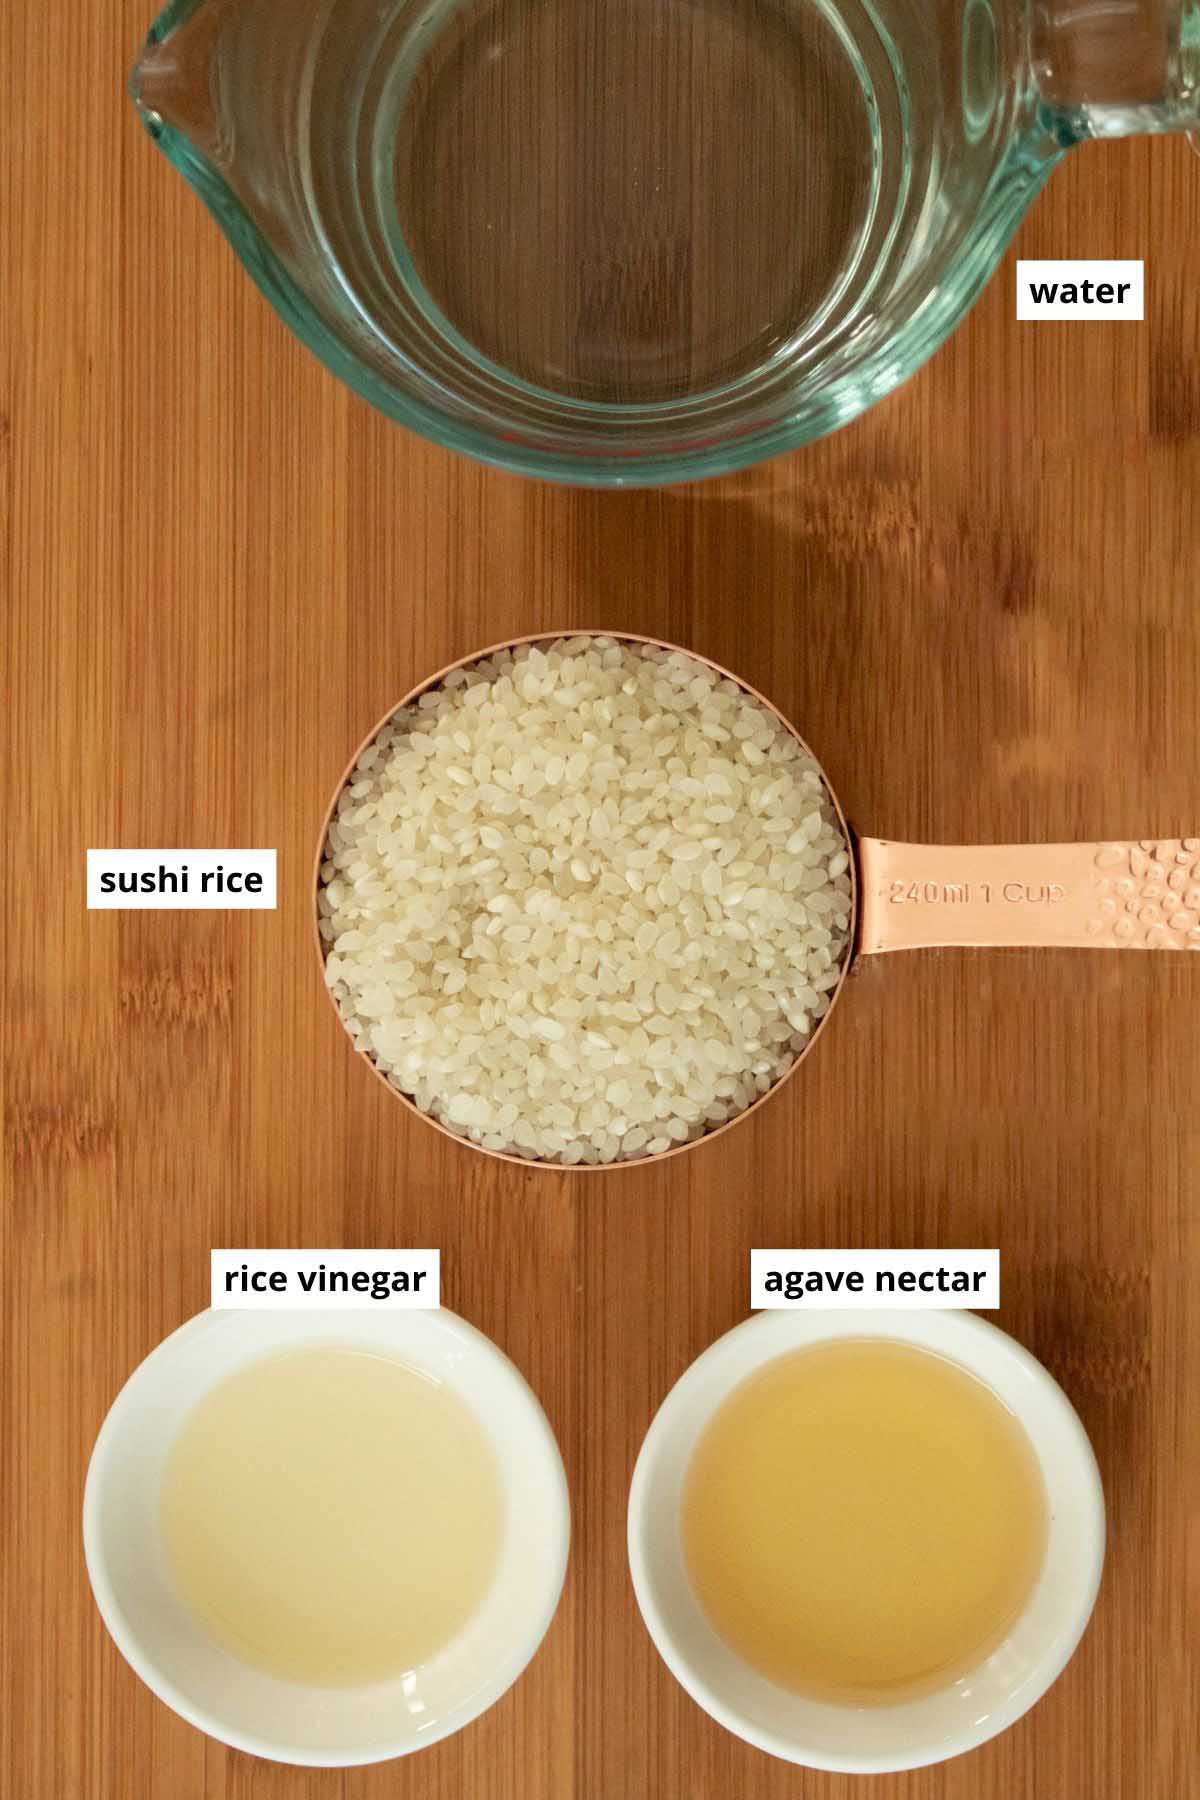 water, uncooked sushi rice, rice vinegar, and agave nectar arranged in cups on a wooden cutting board